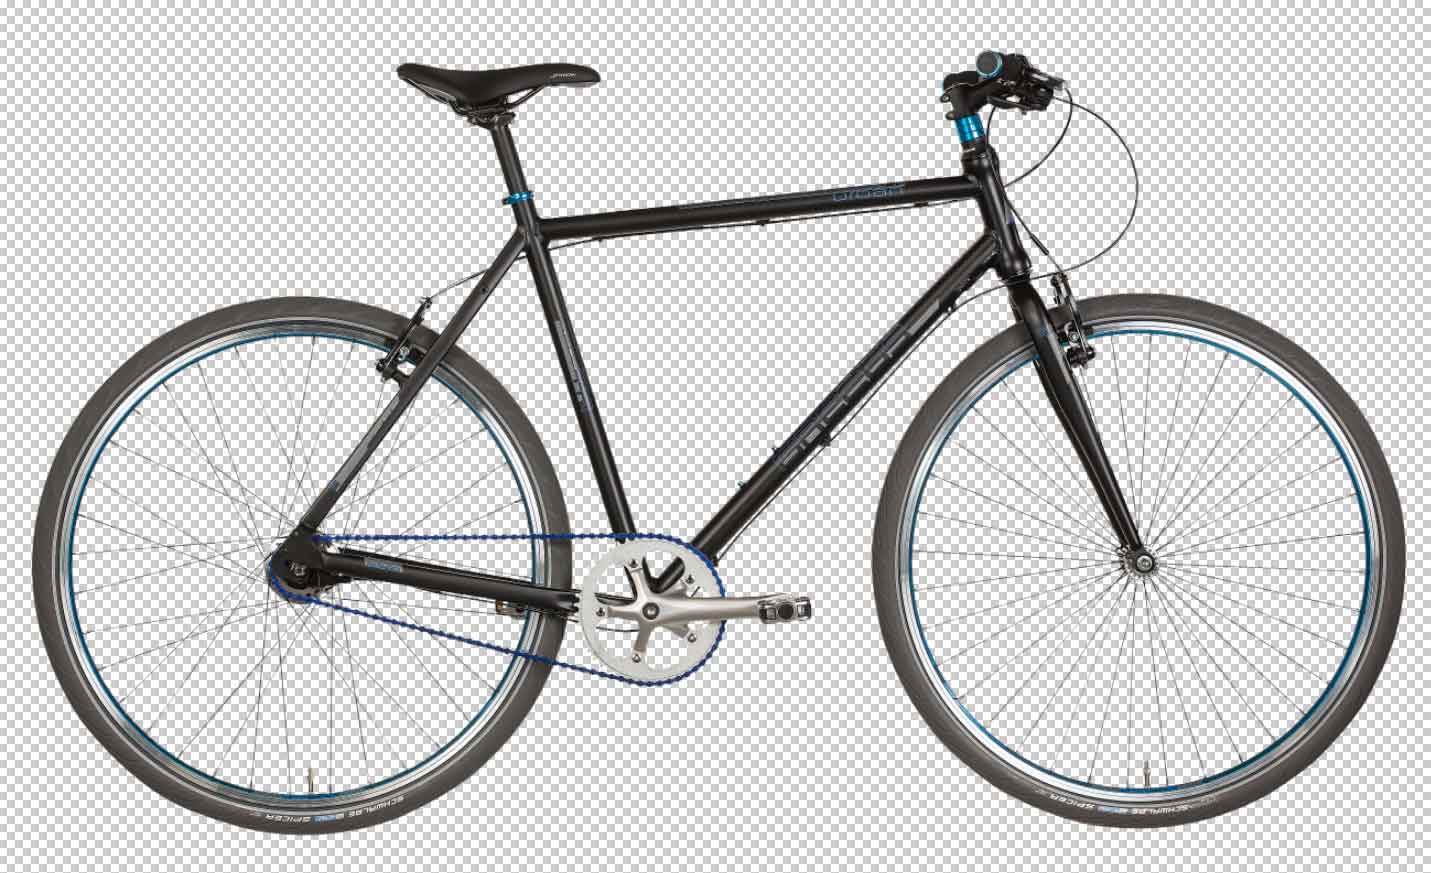 bicycle clipping path service